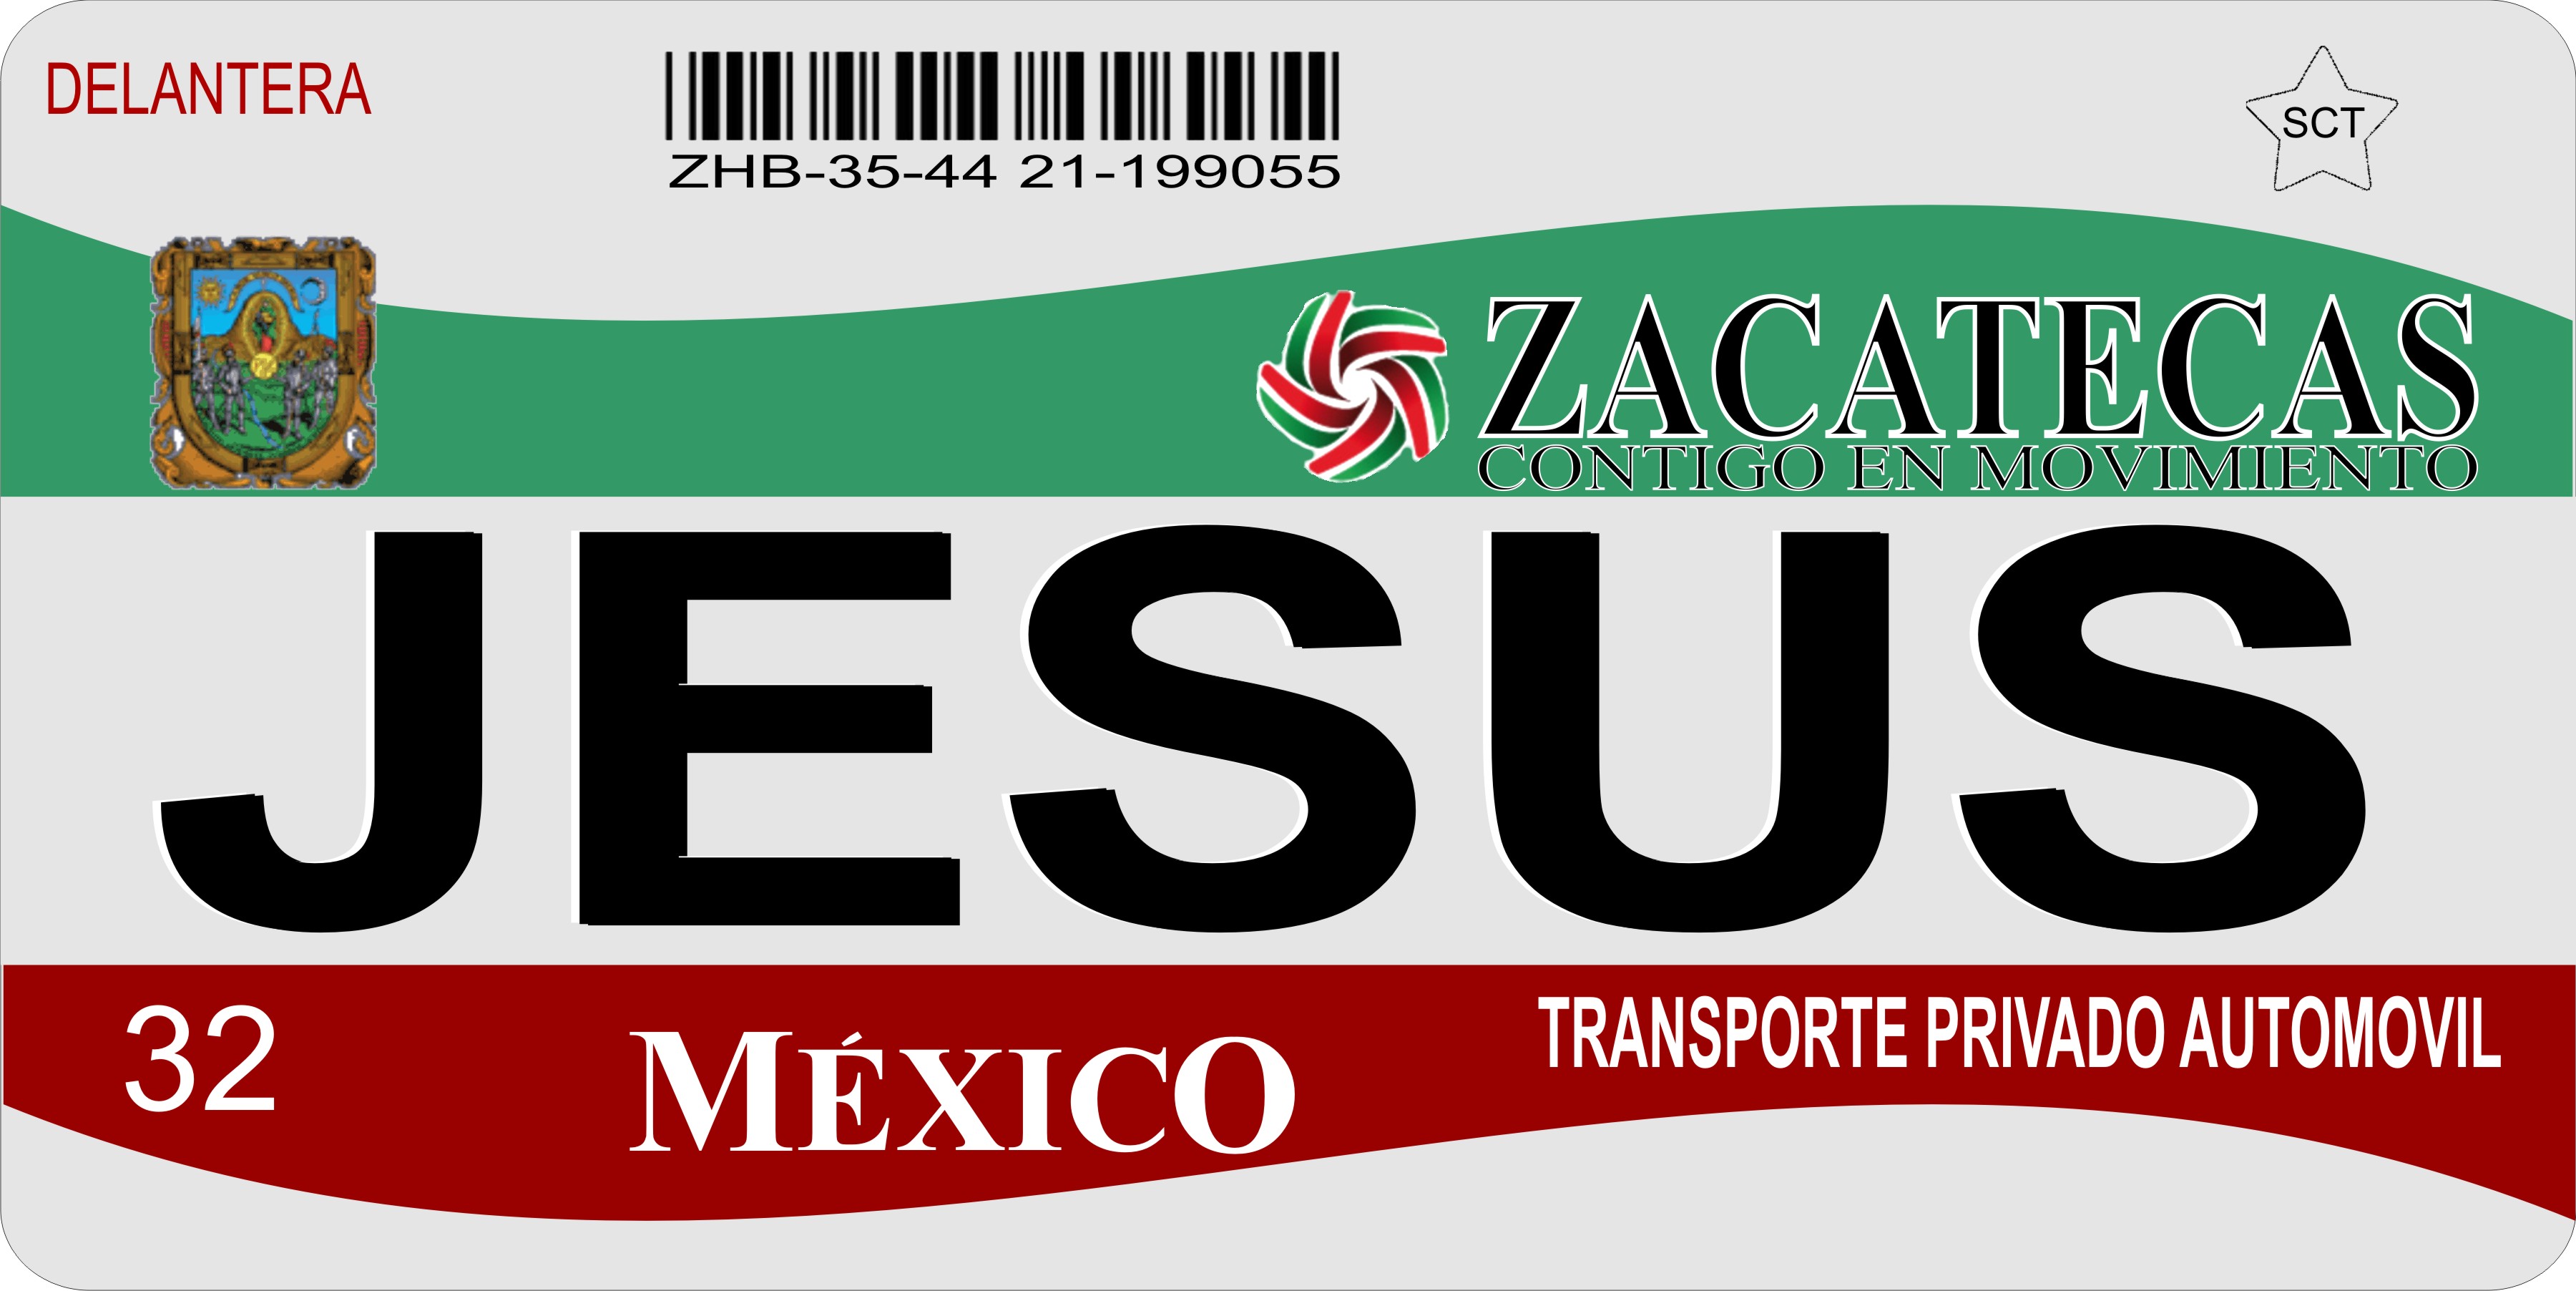 Mexico Zacatecas Photo LICENSE PLATE Free Personalization on this PLATE